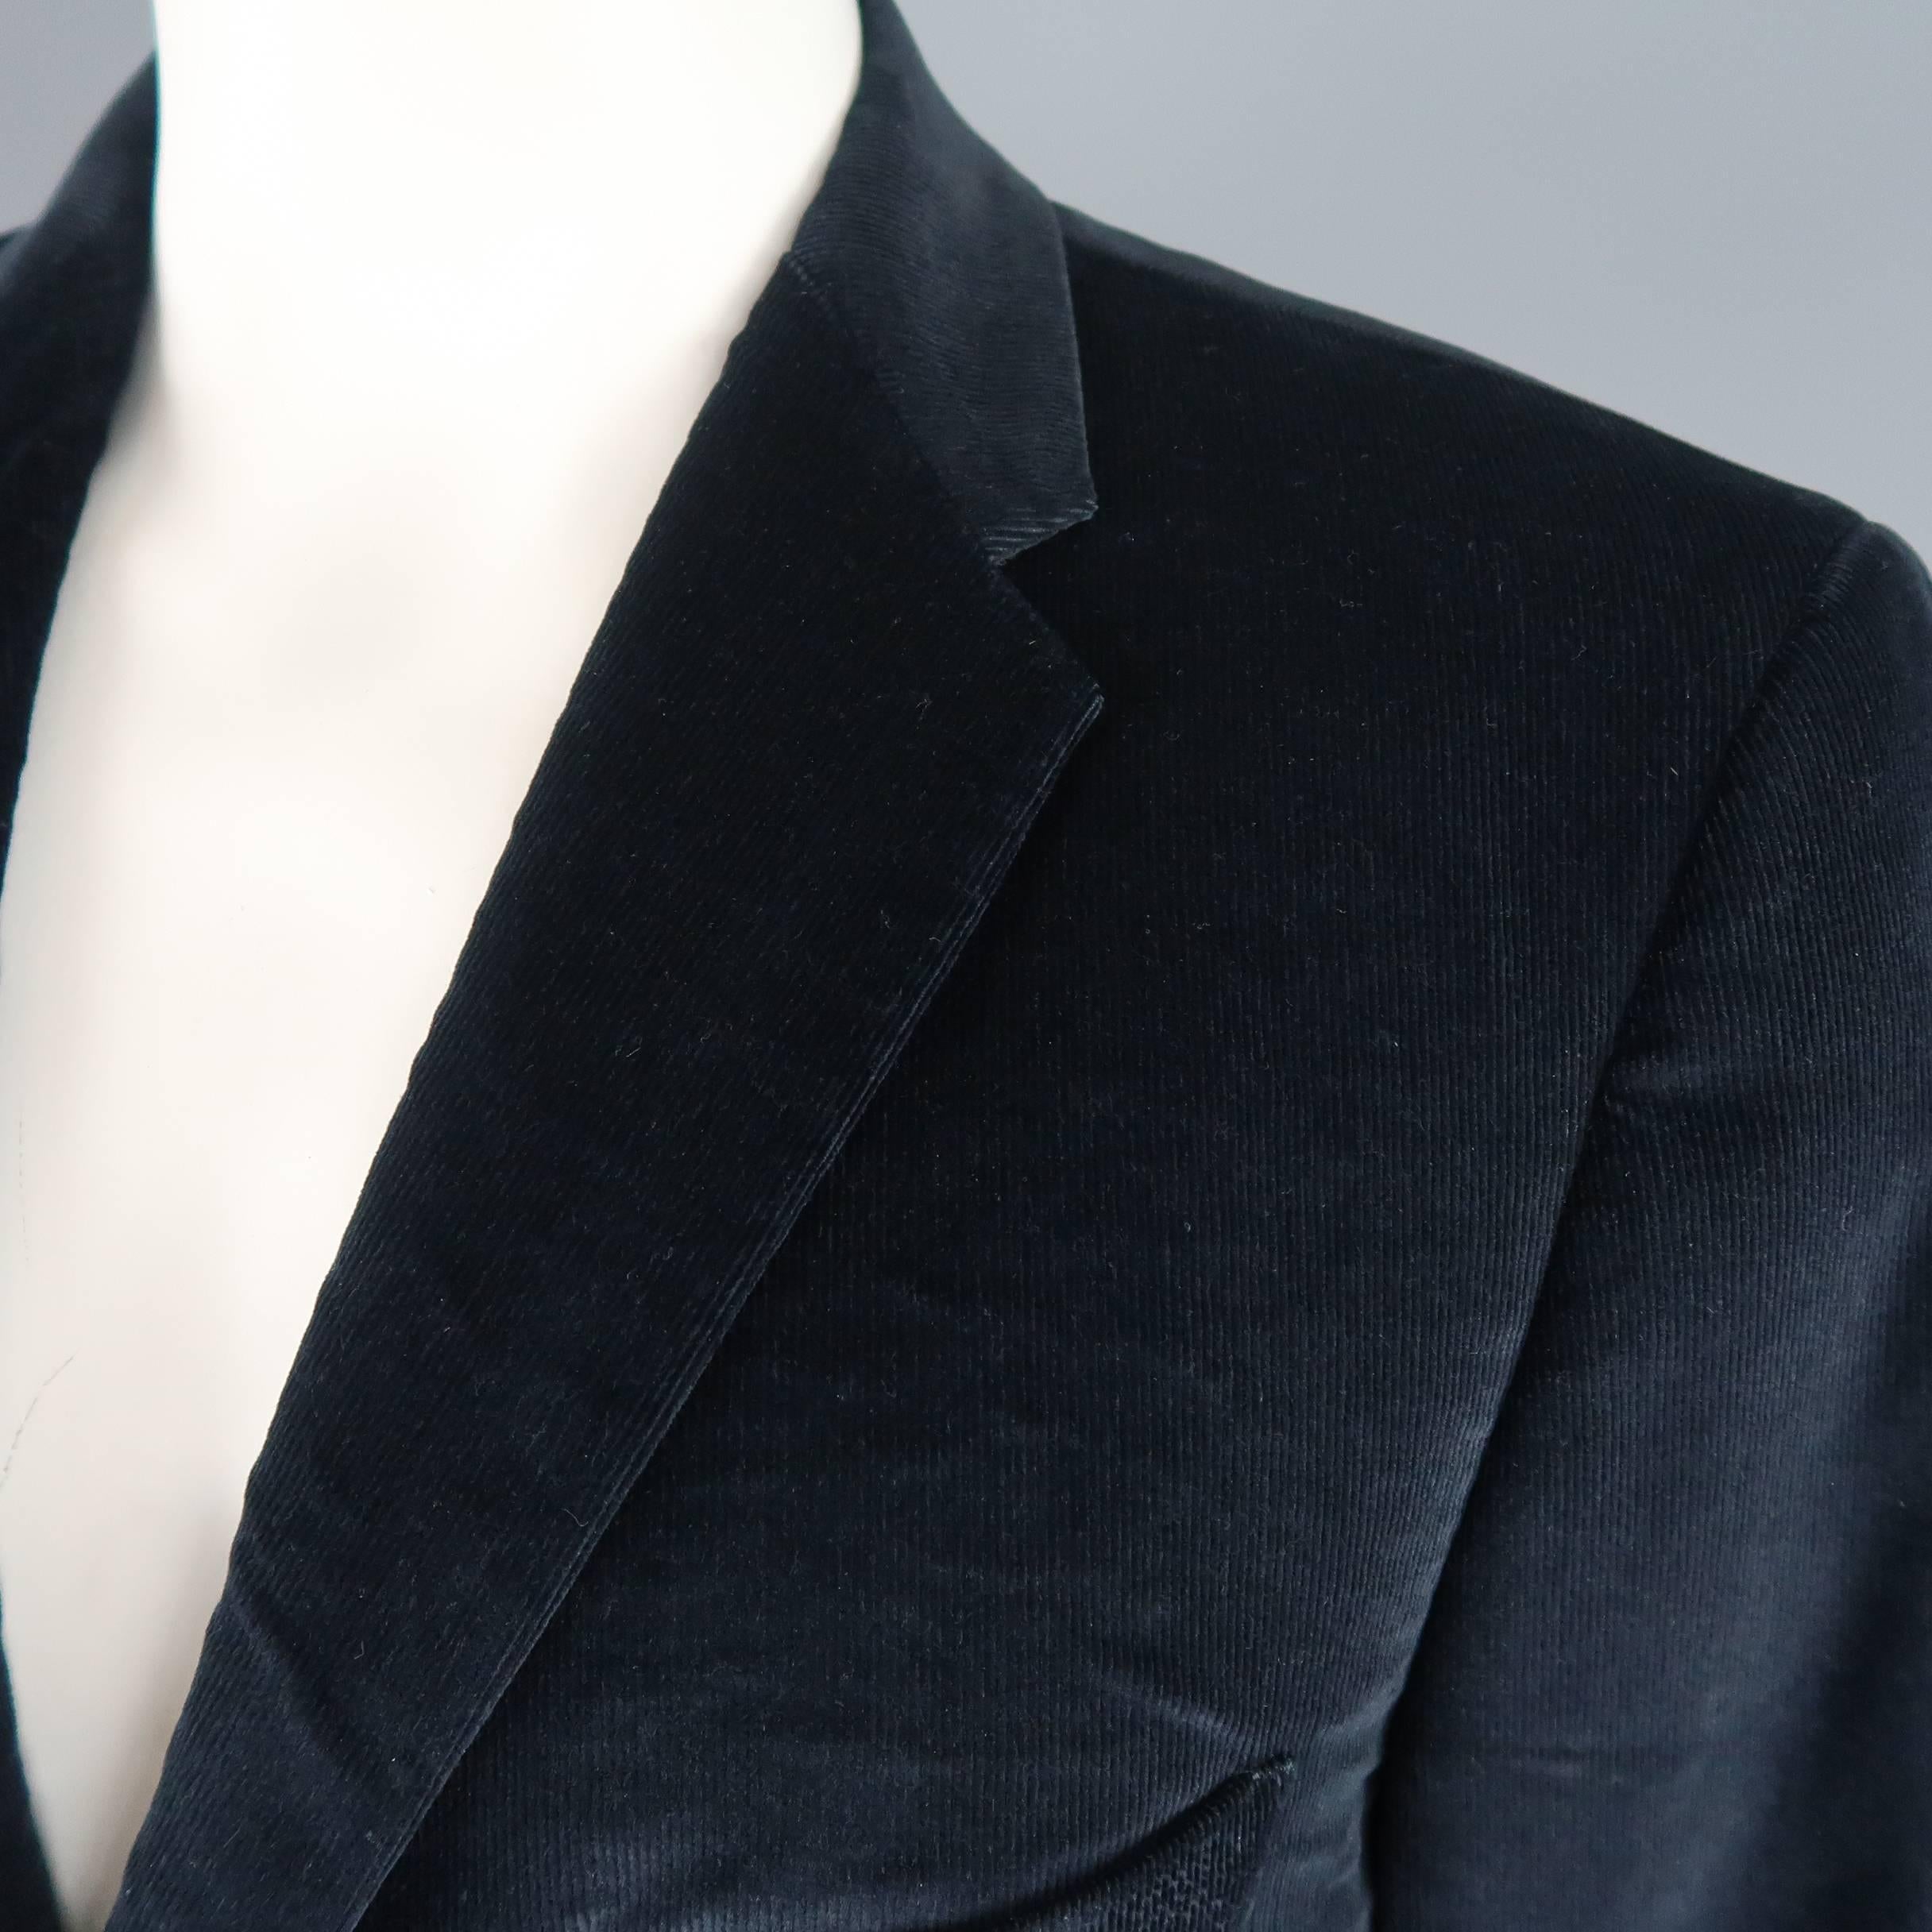 Single breasted SALVATORE FERRAGAMO sport coat comes in navy blue corduroy with a notch lapel, three button front, and floral liner. Wear throughout. As-is. Made in Italy.
 
Fair Pre-Owned Condition.
Marked: IT 56
 
Measurements:
 
Shoulder: 18